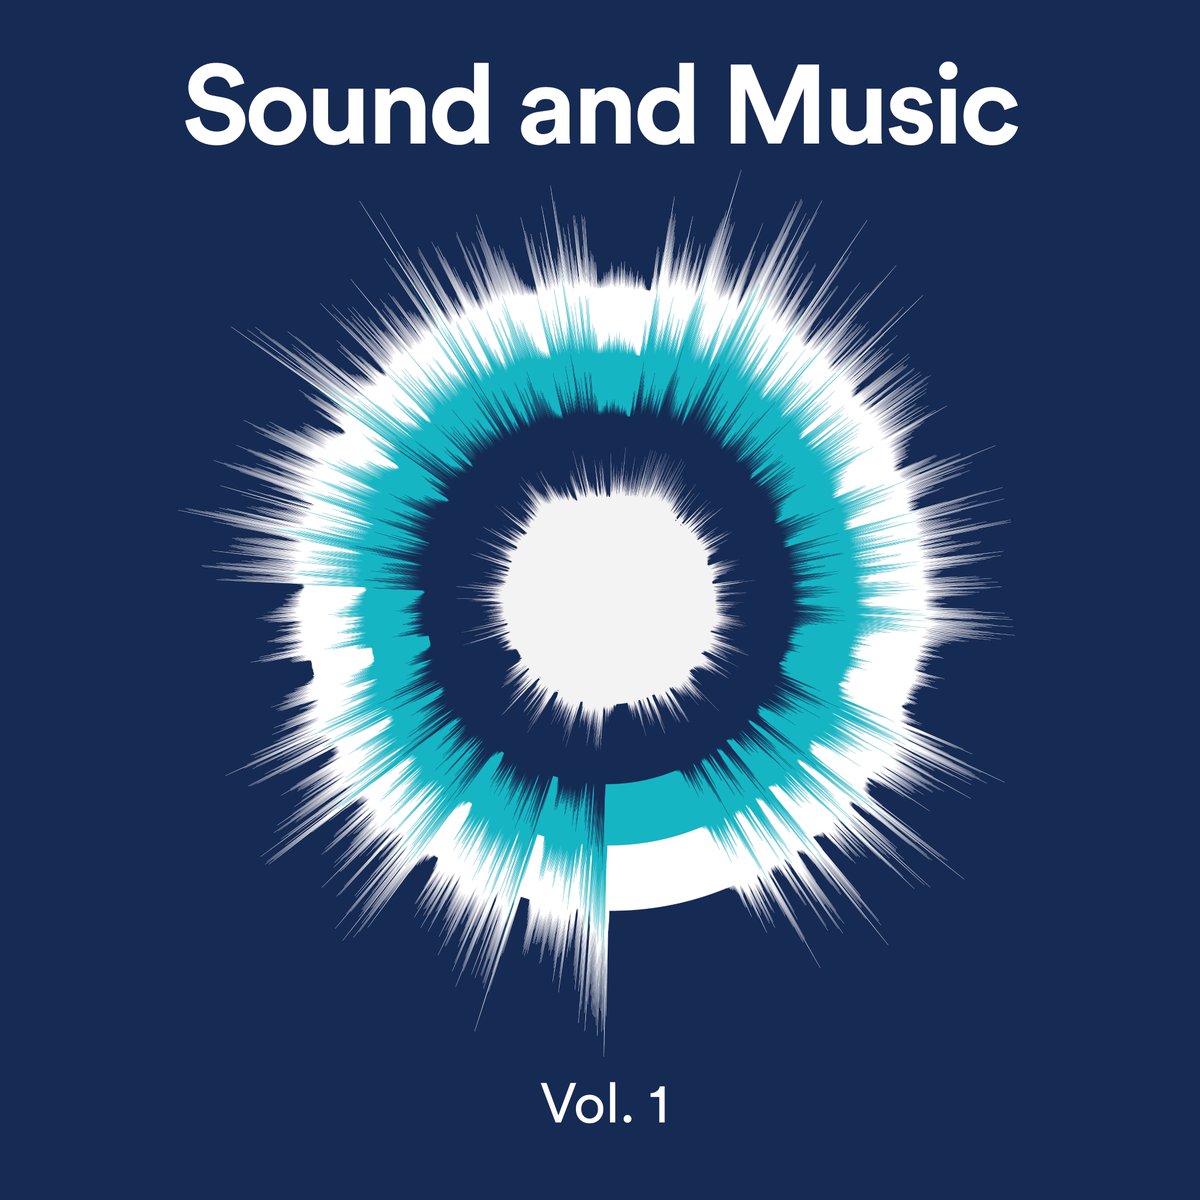 Tomorrow is #BandcampFriday and we’re releasing Sound and Music (Vol. 1), an eclectic mix of tracks generously donated by our alumni.

All proceeds will go towards our work supporting #NewMusic across the UK, so be sure to get your copy tomorrow while @Bandcamp's fees are waived!